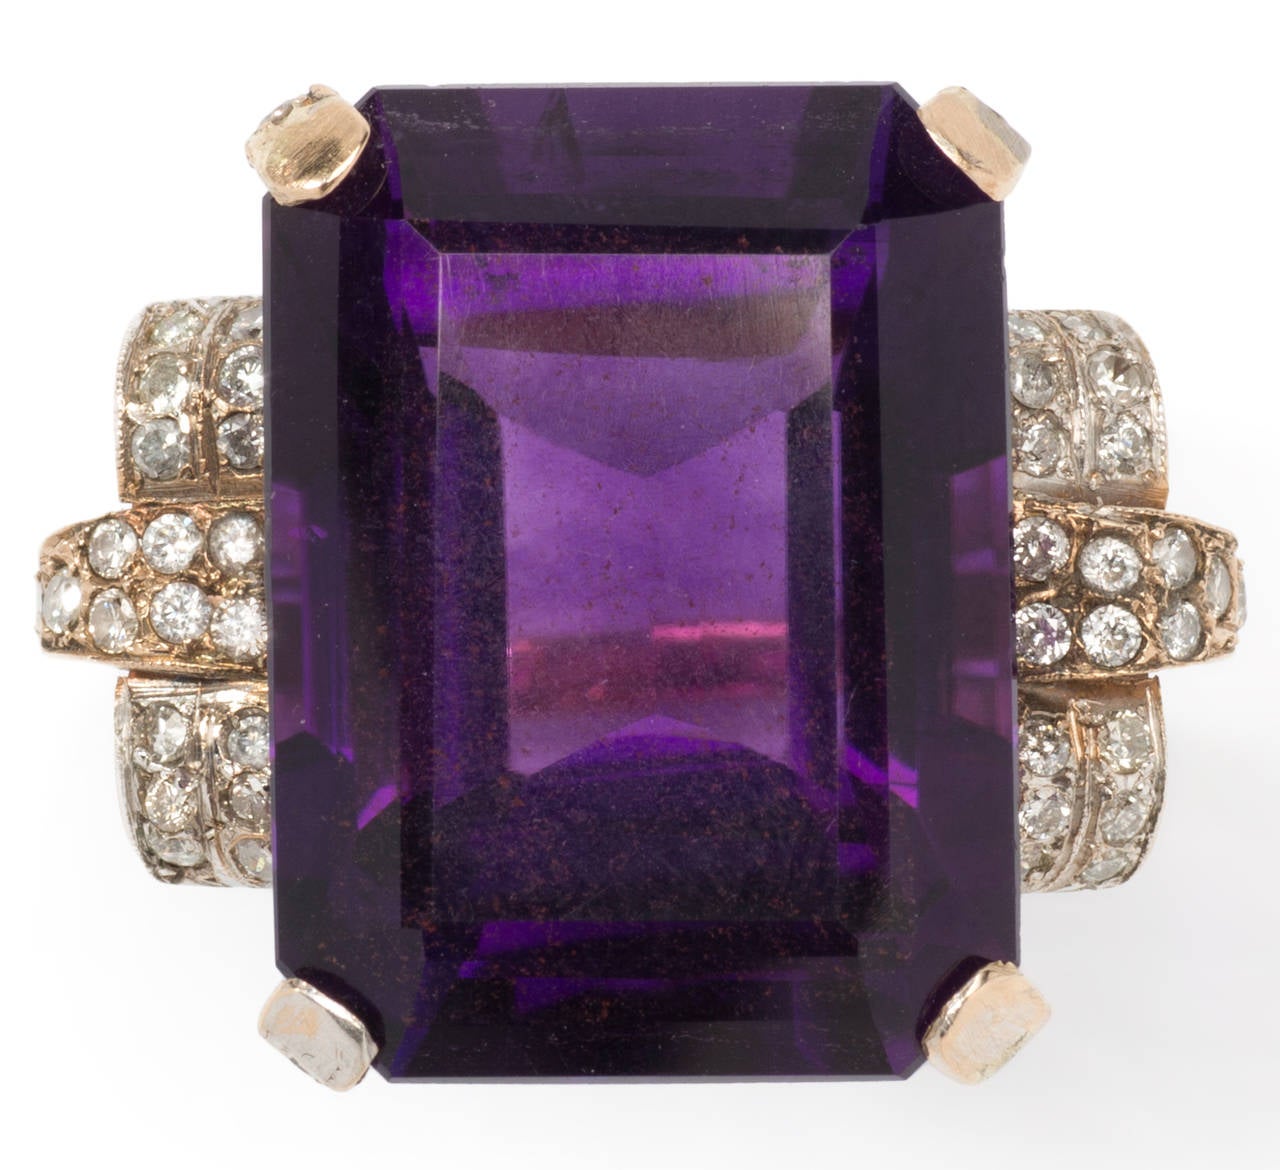 France, 1930s. It is a marvelous example for the piece of Art Deco jewellery.
Large Amethyst ( 20,13 x 14,98 x 11,42 mm ) weighing circa 19,91 ct. accented by 50 diamonds weighing ca. 0,48 ct. Mounted in 18 carat yellow gold. 
Total weight: 8,45